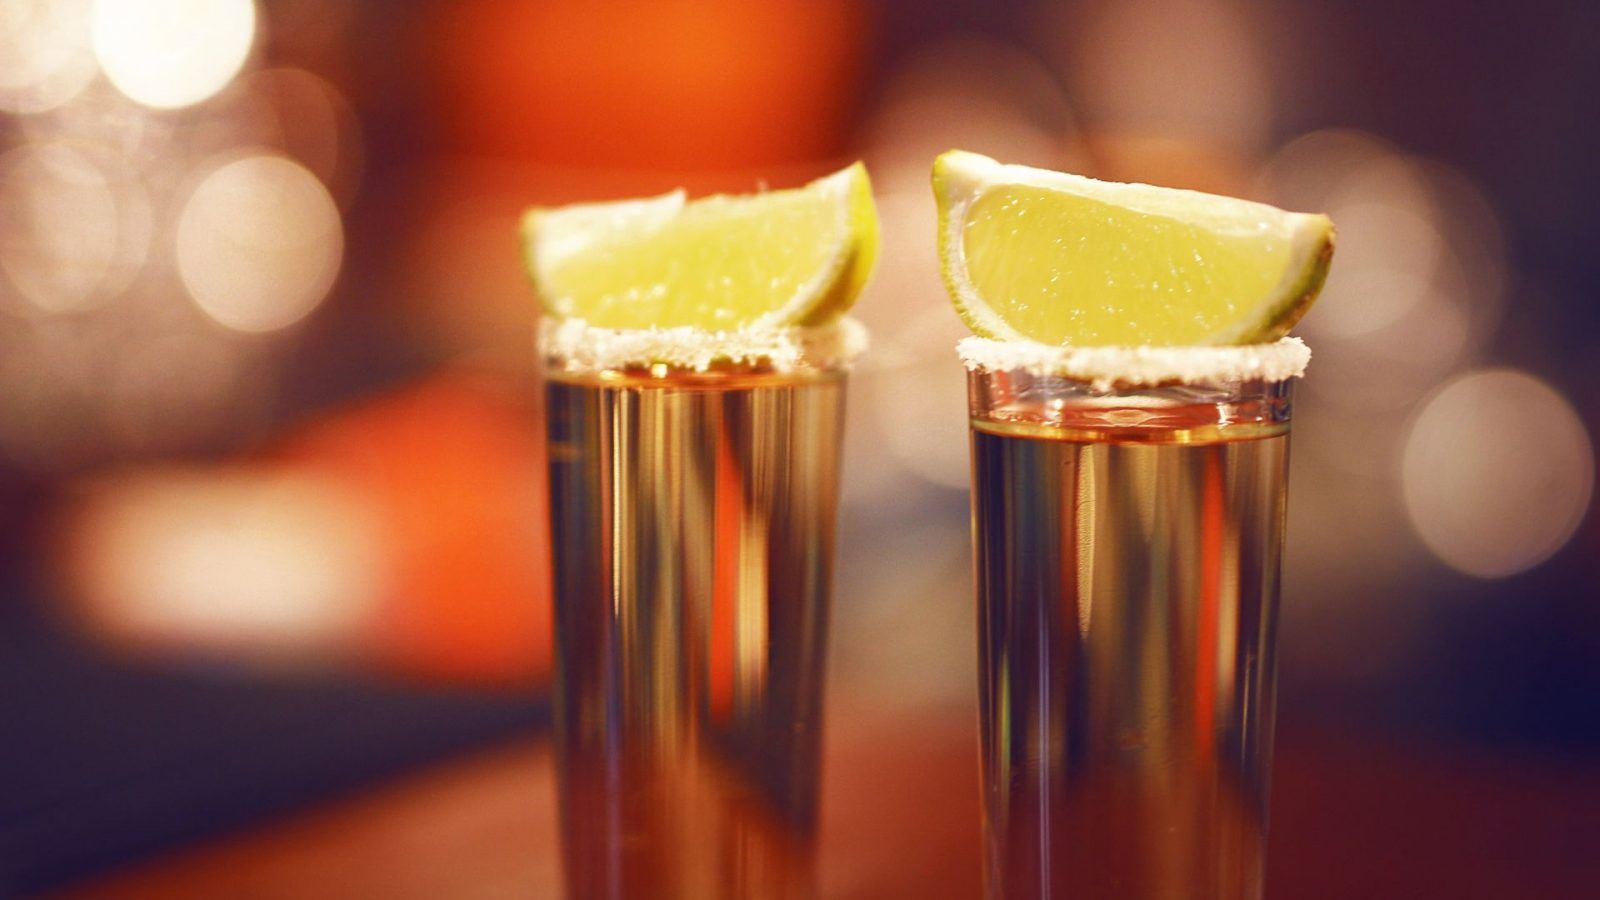 Tequila and Mezcal: What’s the difference between the two?